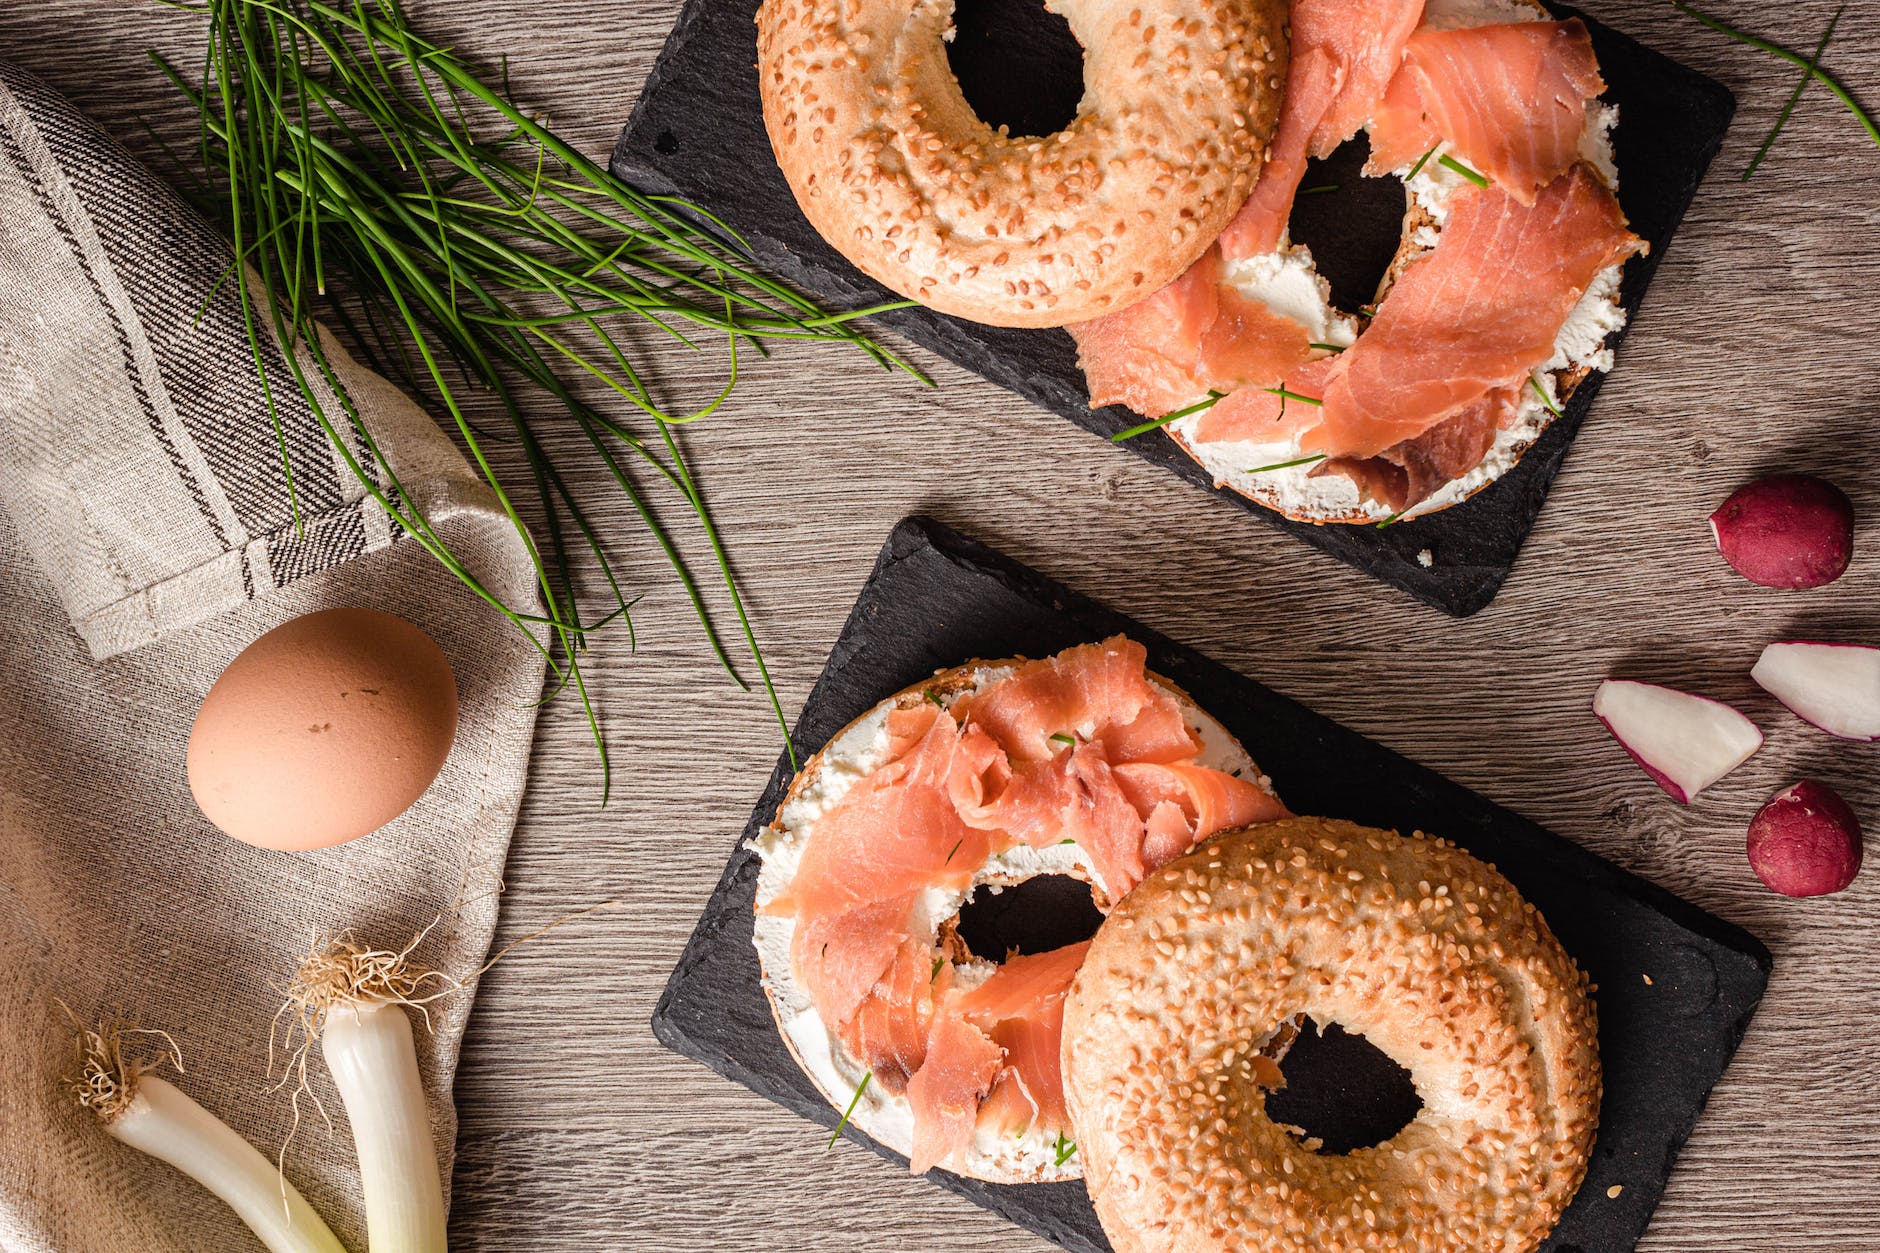 bagel with salmon